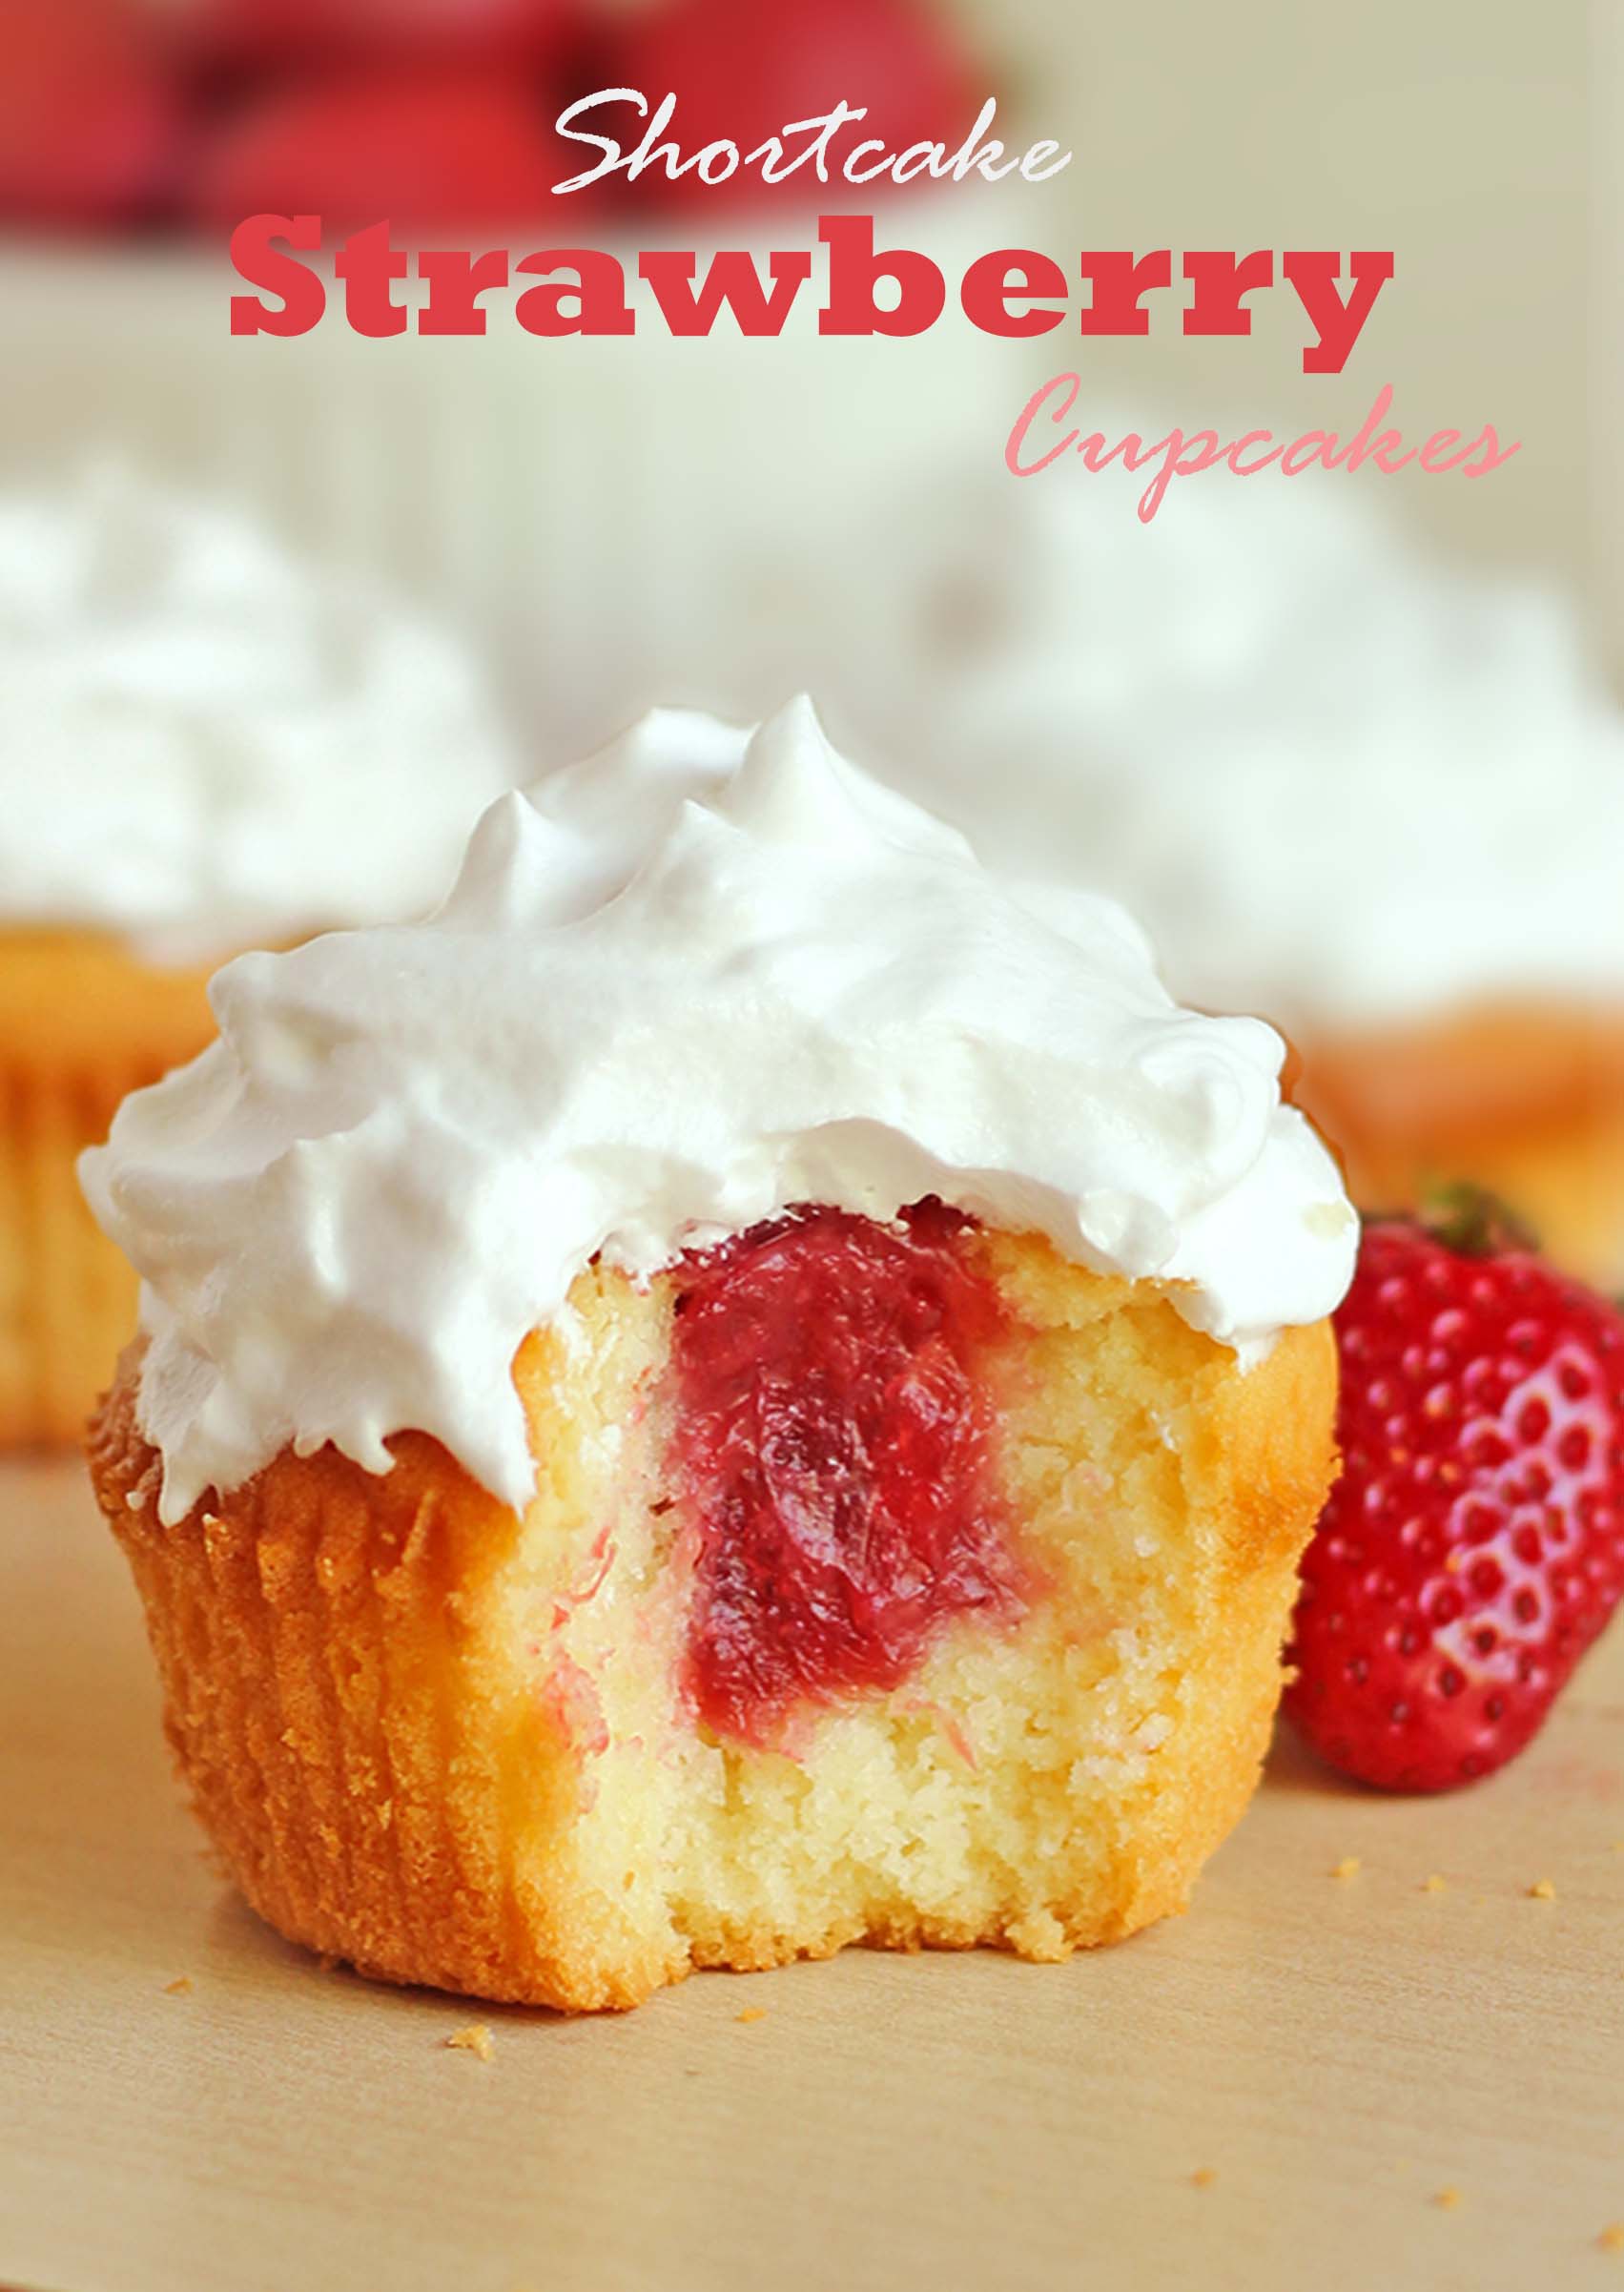 These strawberry shortcake cupcakes are fluffy, moist and very-vanilla with pockets of strawberry jam inside each bite